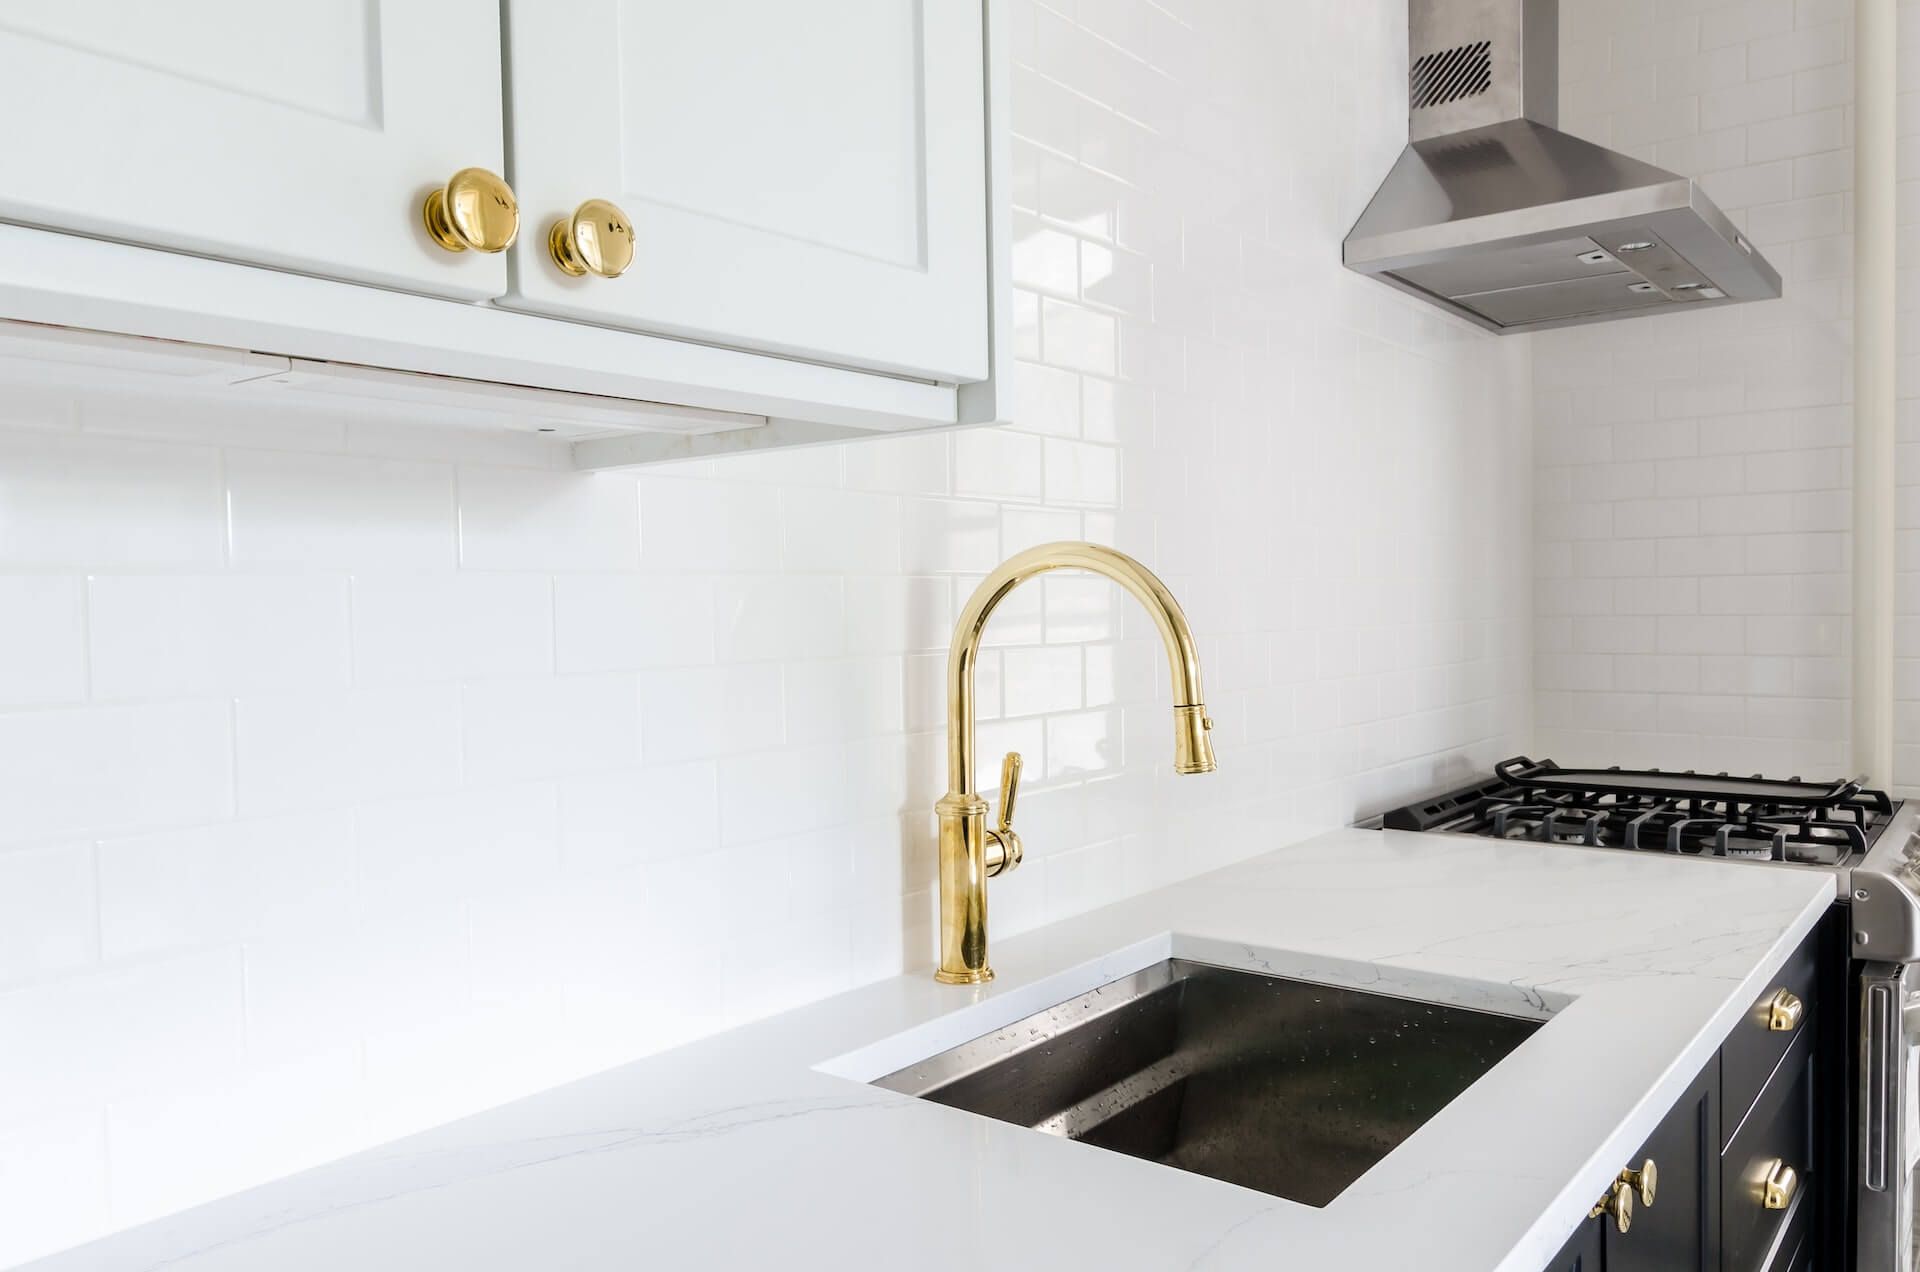 Brass, Bronze, Chrome and Stainless. Everything You Need To Know